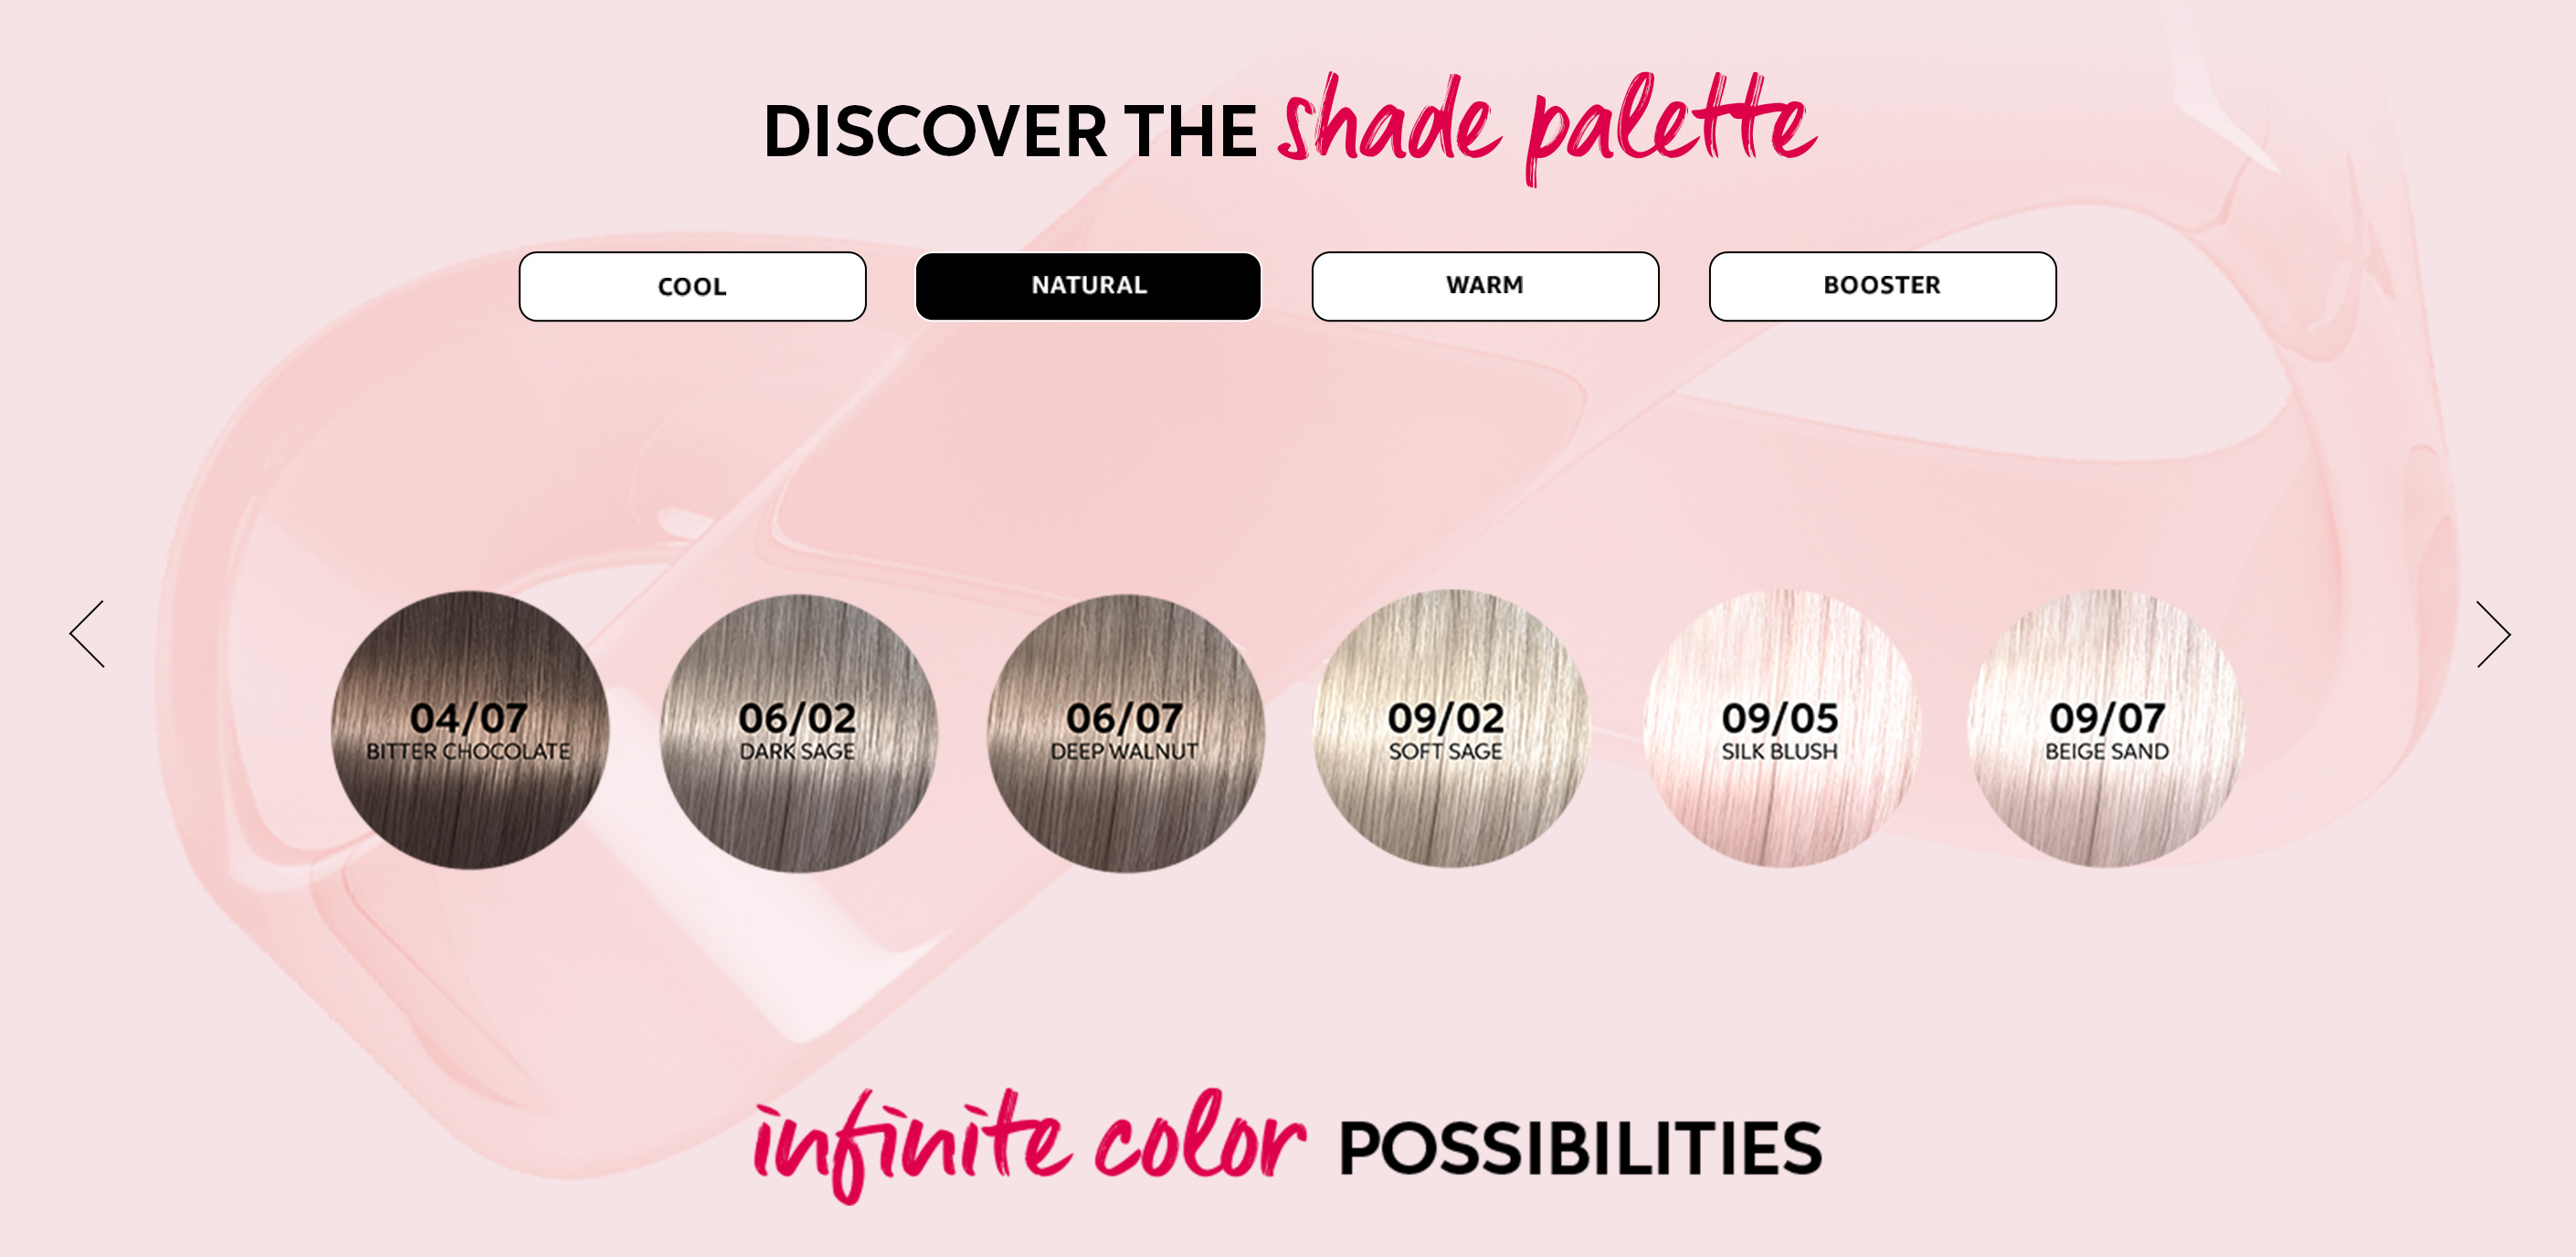 Swatches of the Natural tones from the Wella Shinefinity Glaze shade palette.